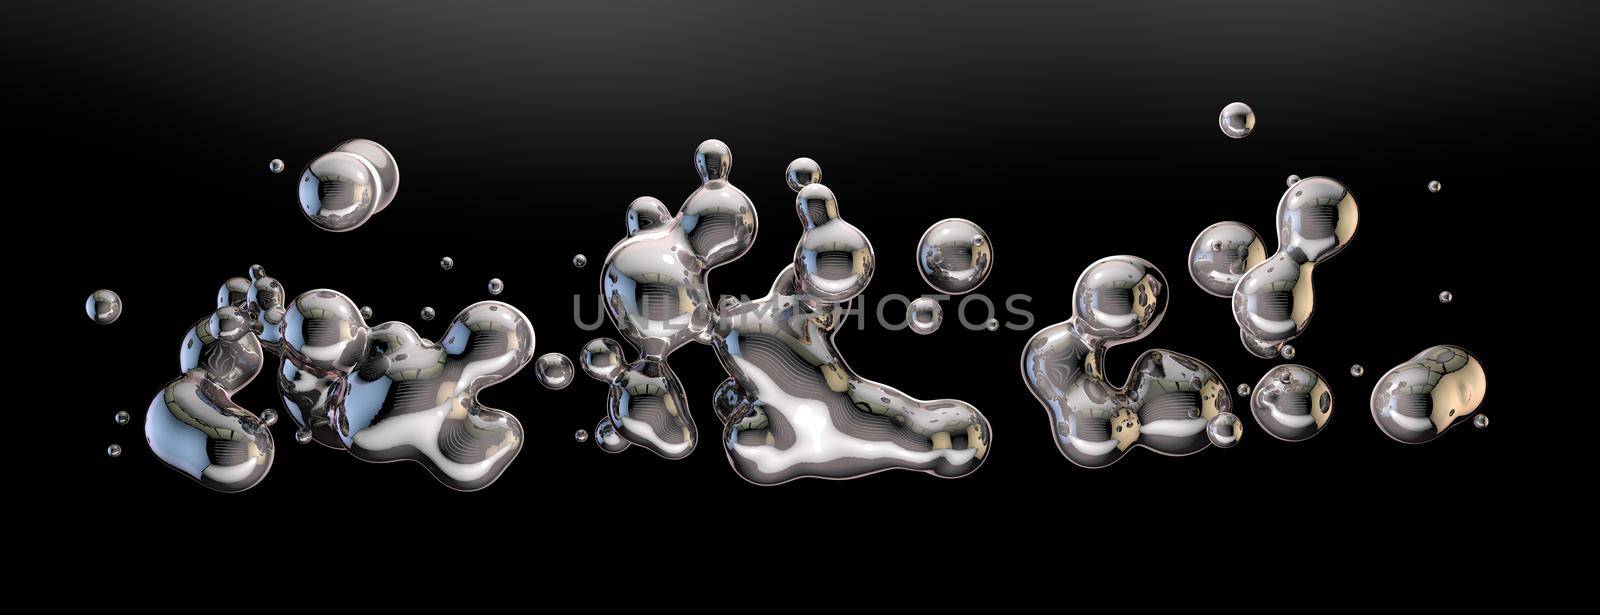 Abstract tin or silver liquid drops background.3d illustration by carloscastilla